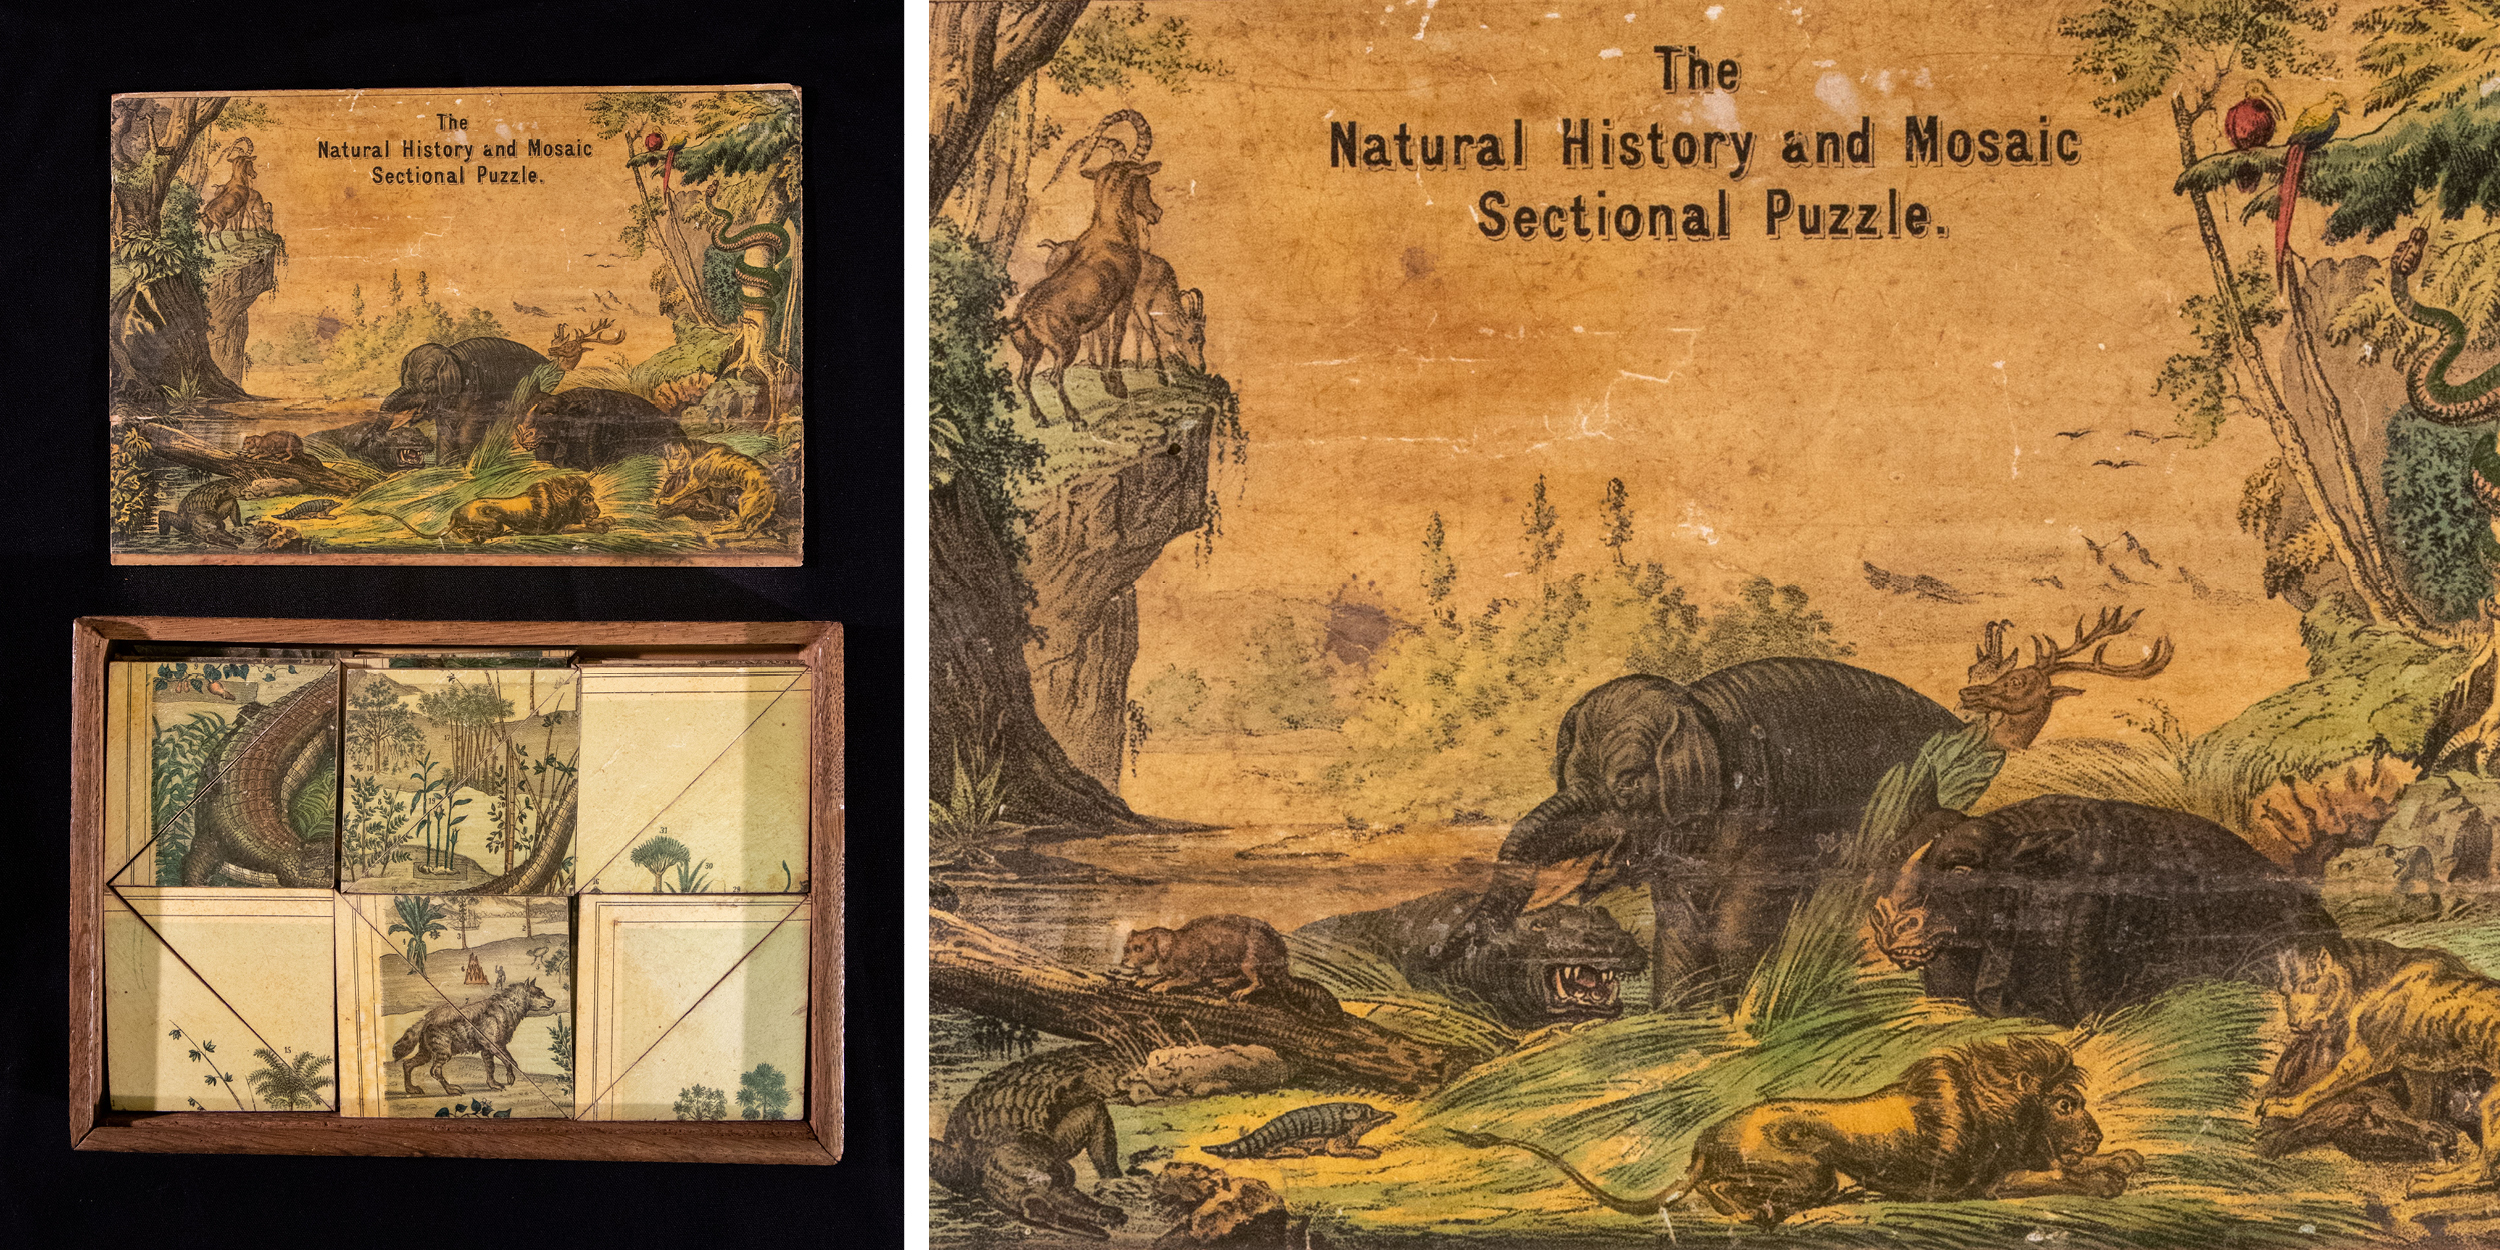 Photograph of an open puzzle box. The puzzle shows a fantastical scene of a jungle with many different animals and creatures.